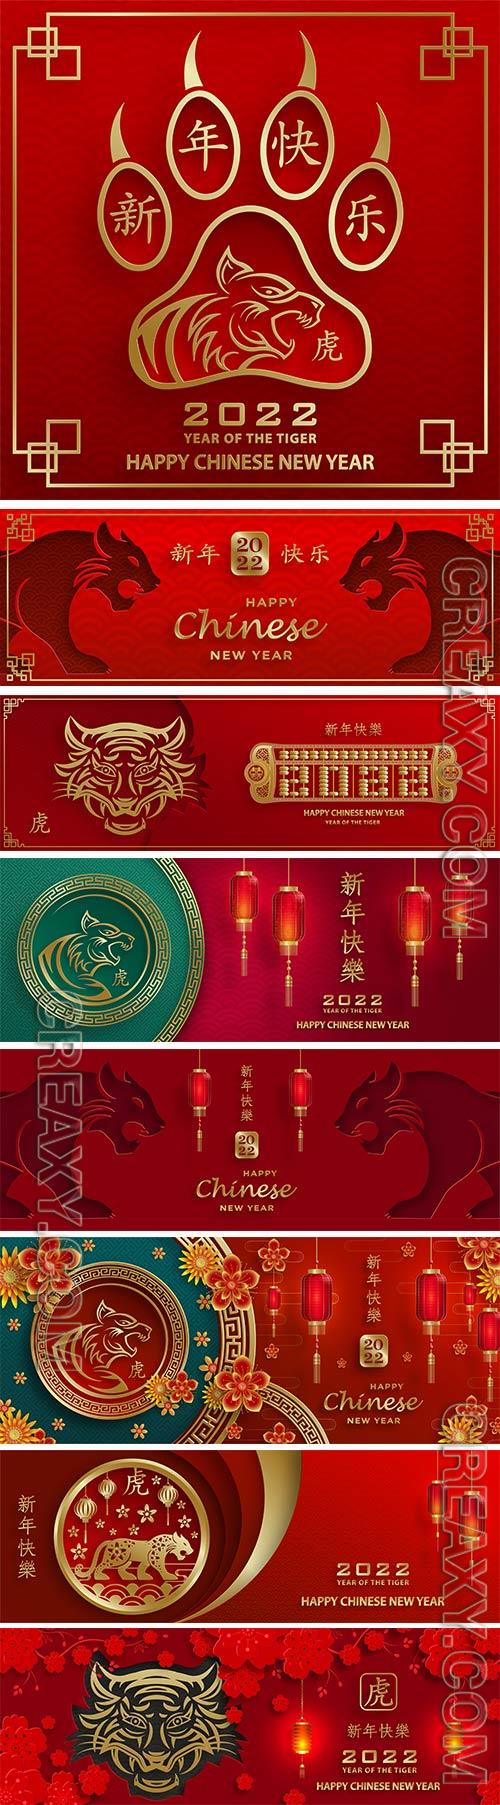 Happy chinese new year 2022 vector design